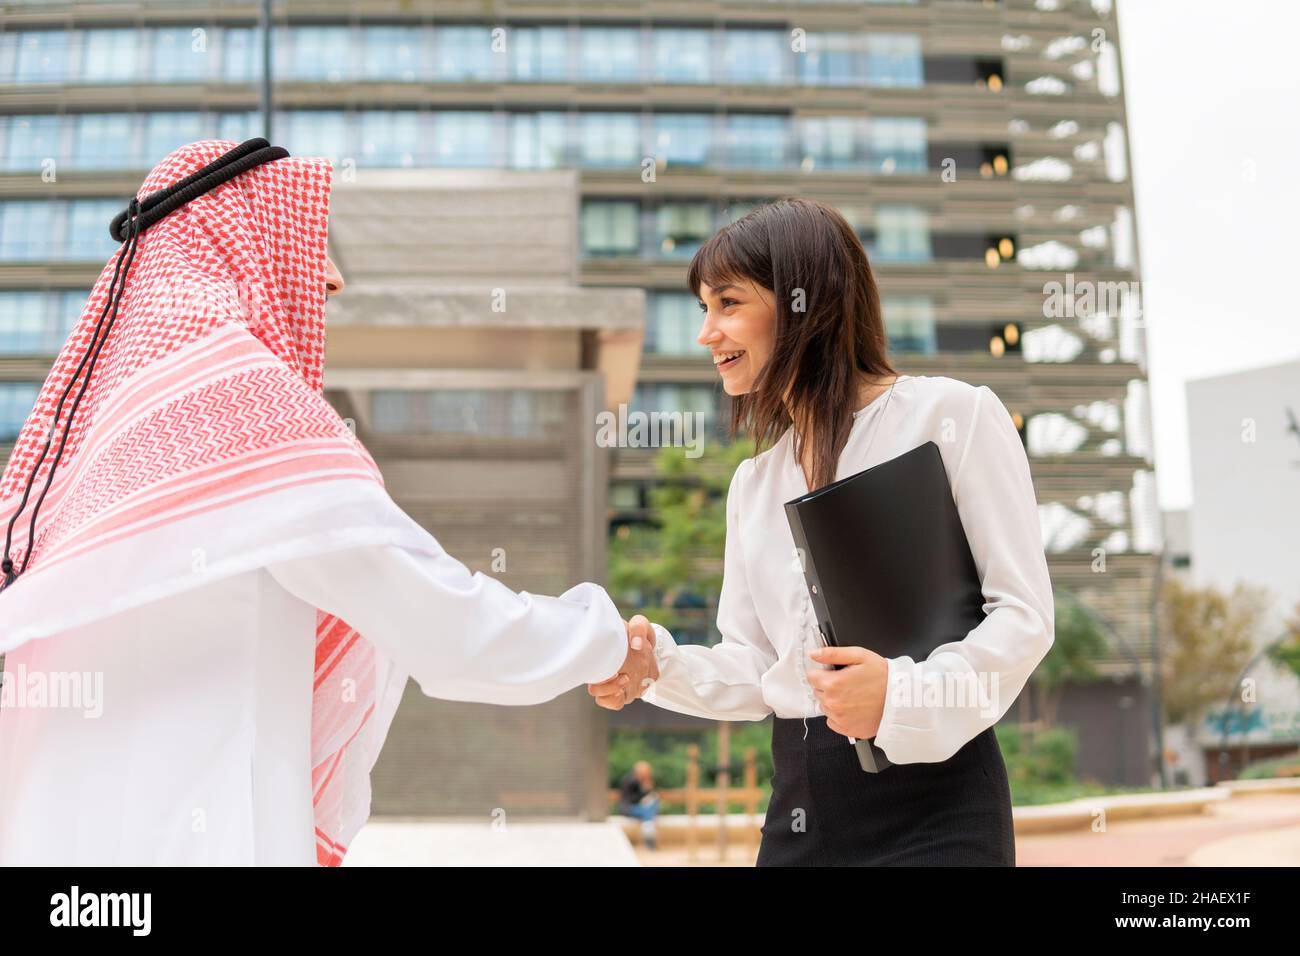 Young pleasant caucasian businesswoman greeting arab male client at meeting outdoors, two smiling business partners saudi man and european woman shaking hands after making successful deal Stock Photo